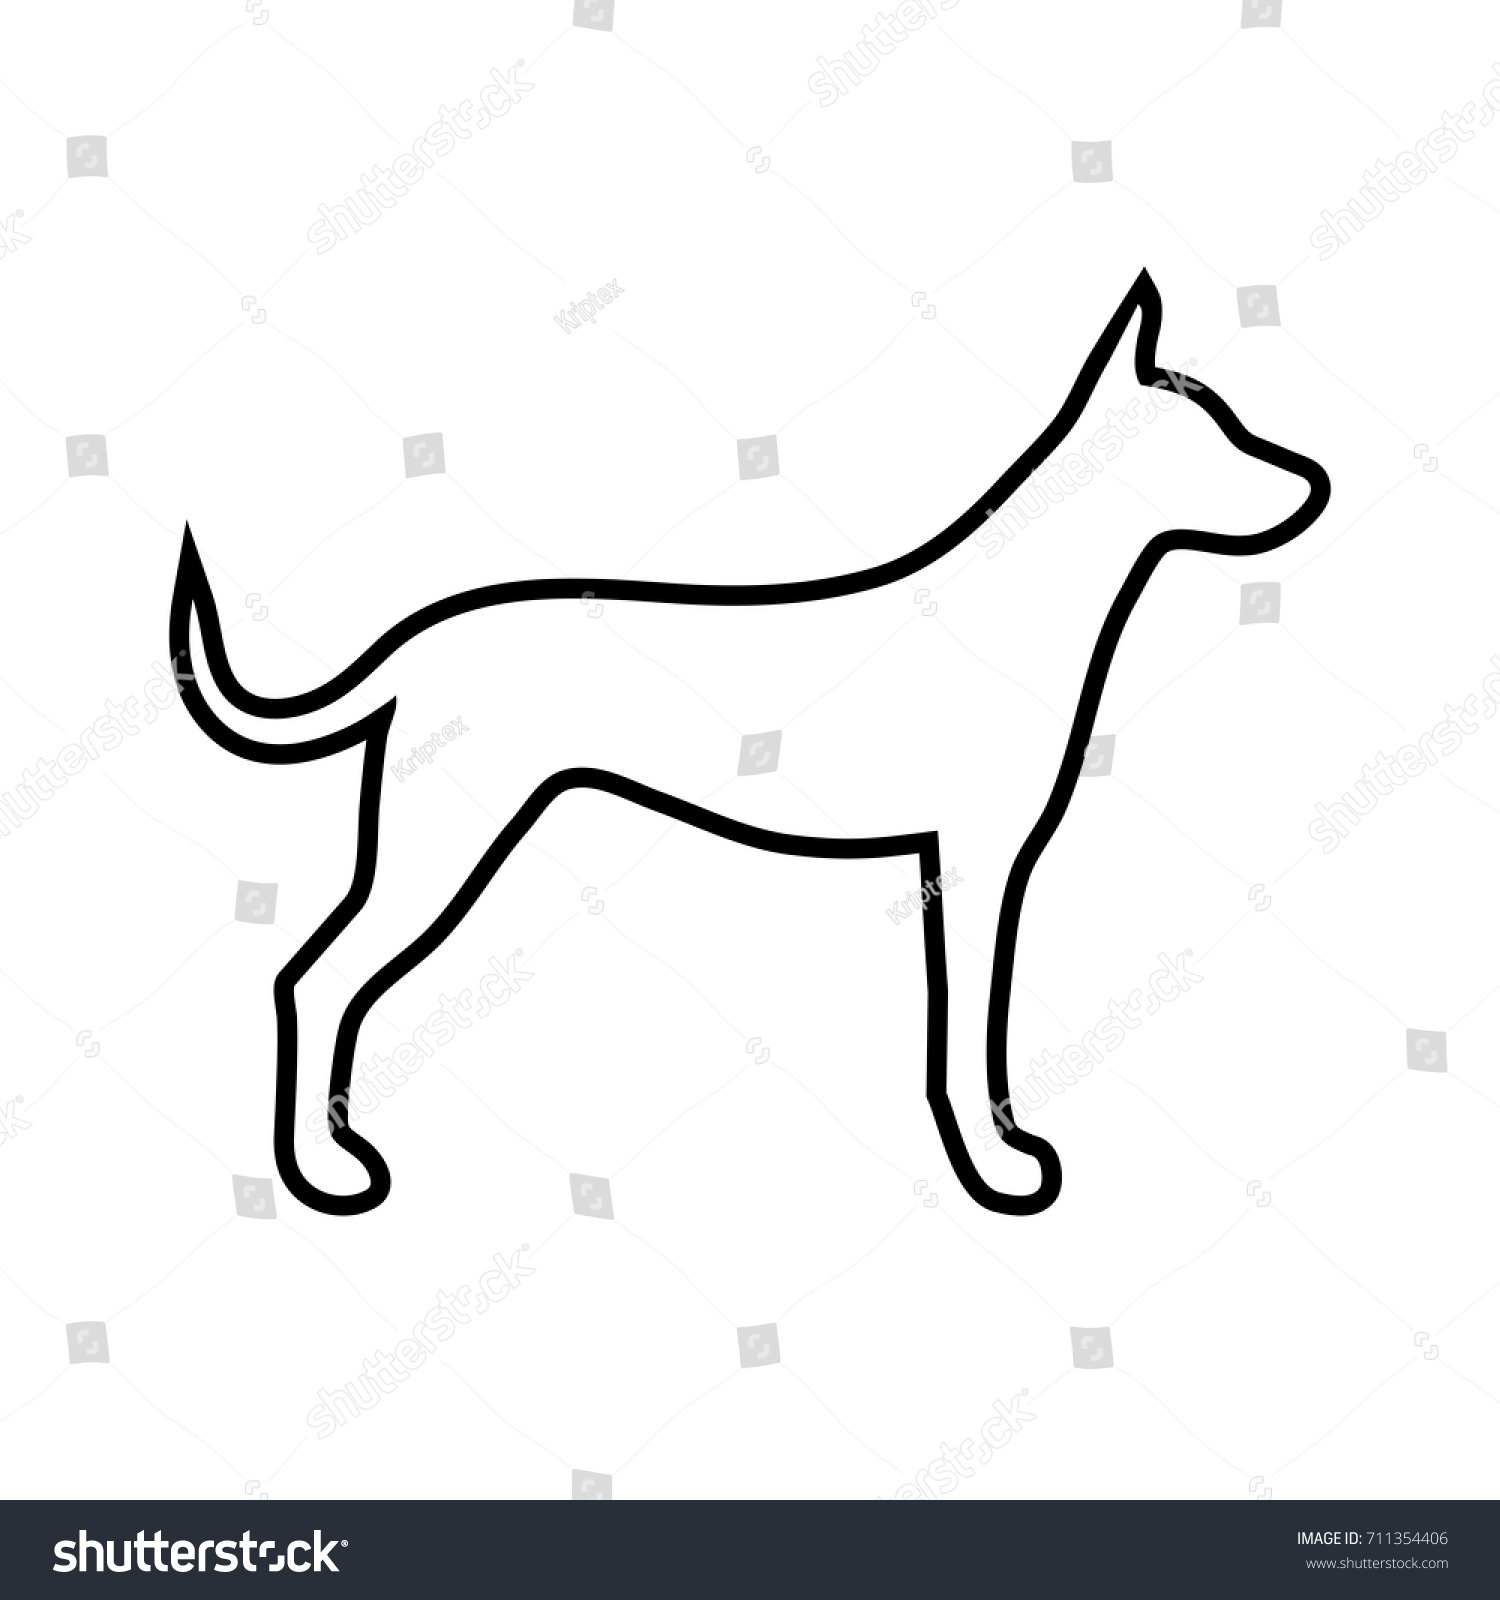 Simple Line Vector Dog Icon On Stock Vector 711354406 - Shutterstock